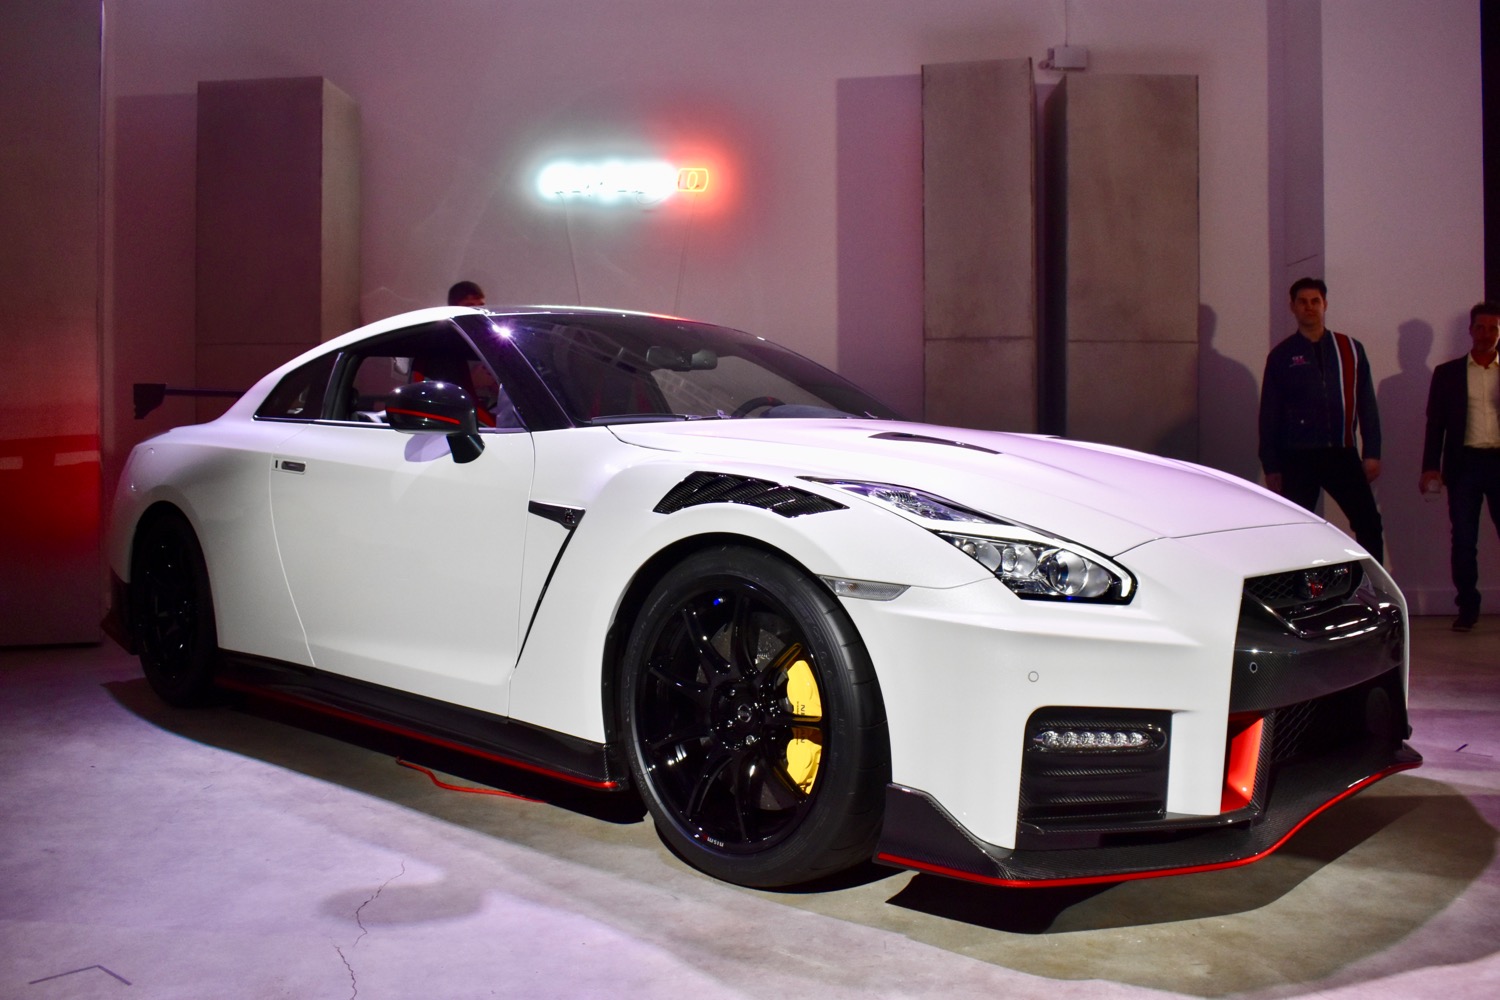 2020 Nissan GT-R Nismo Unveiled at 2019 New York Auto Show